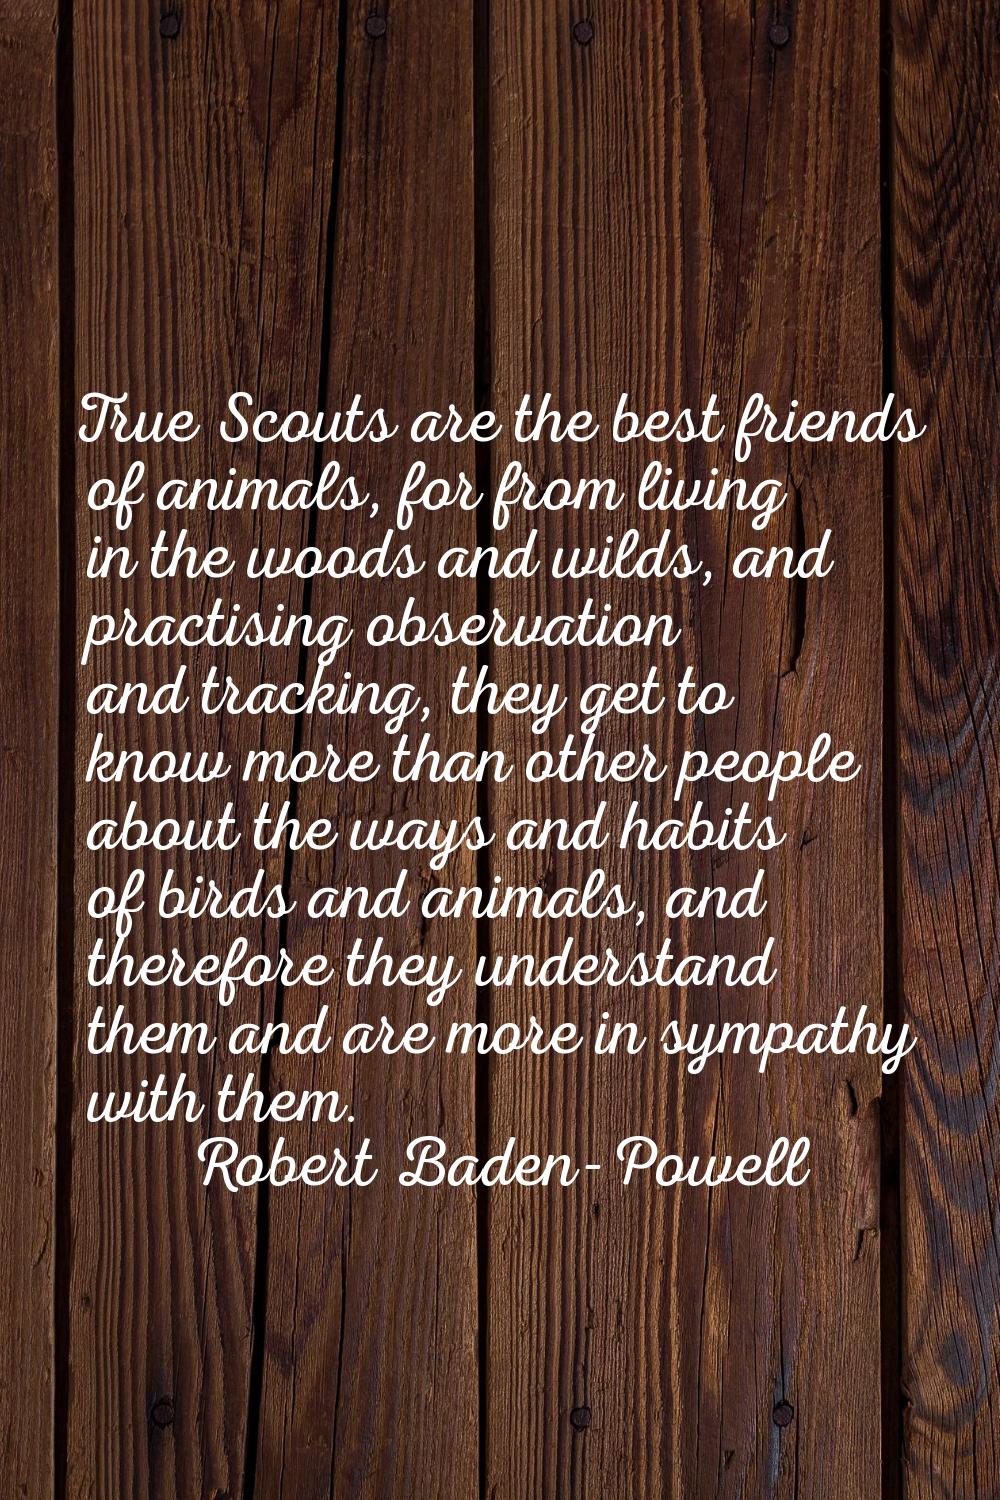 True Scouts are the best friends of animals, for from living in the woods and wilds, and practising